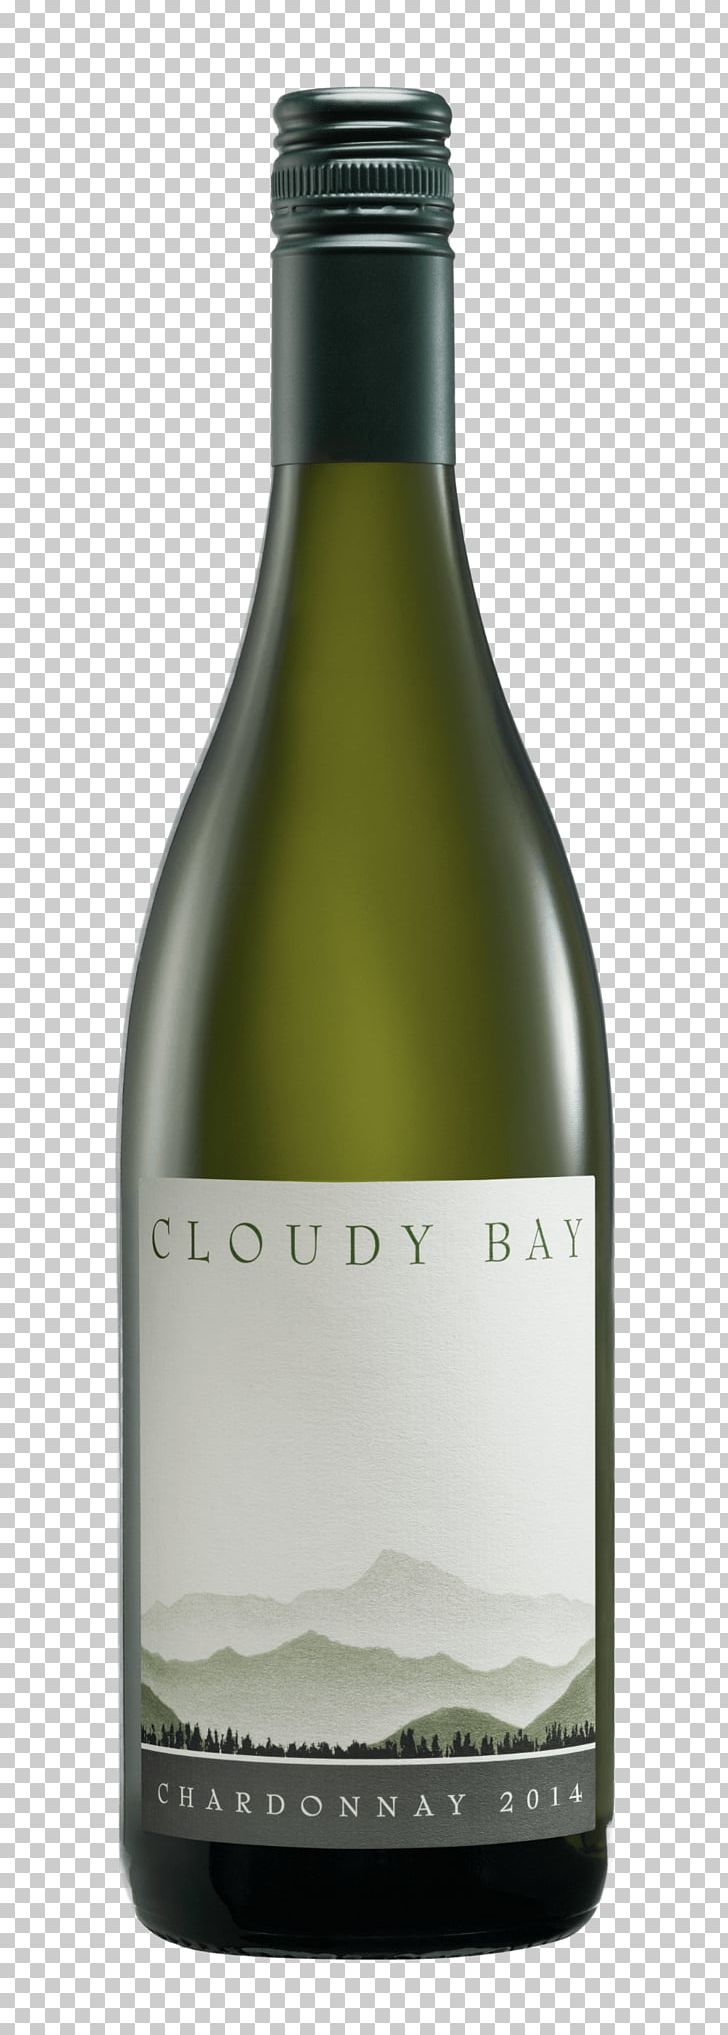 Champagne White Wine Cloudy Bay Vineyards Te Koko-o-Kupe / Cloudy Bay Chardonnay PNG, Clipart, Alcoholic Beverage, Bay, Bottle, Brancott Estate, Champagne Free PNG Download